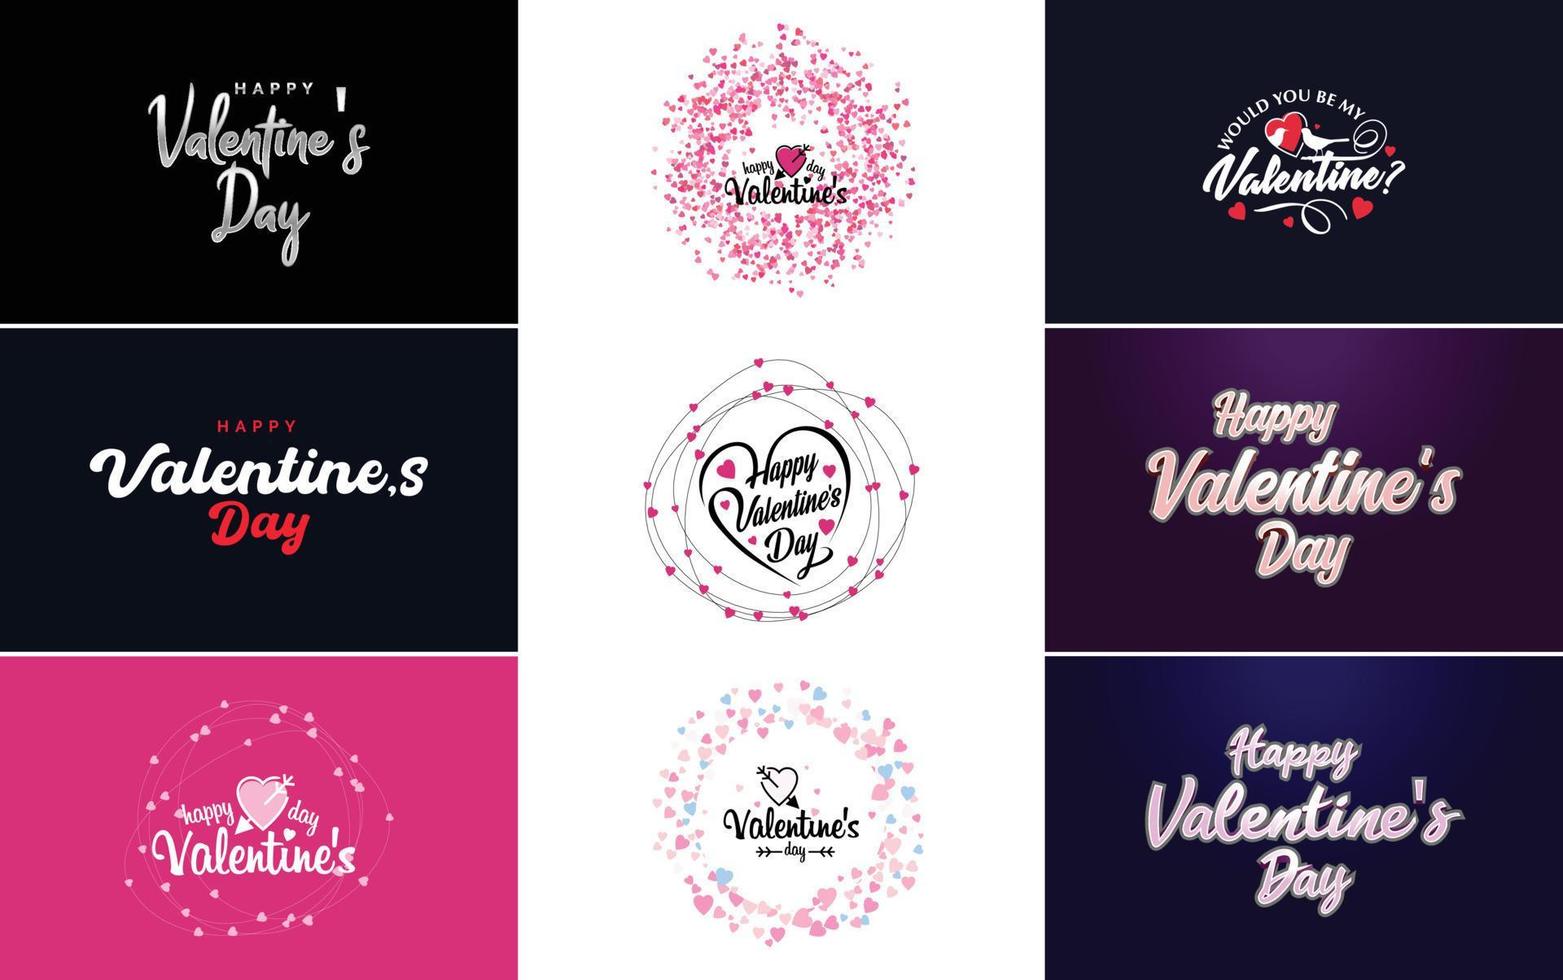 Happy Valentine's Day typography design with a heart-shaped wreath and a gradient color scheme vector